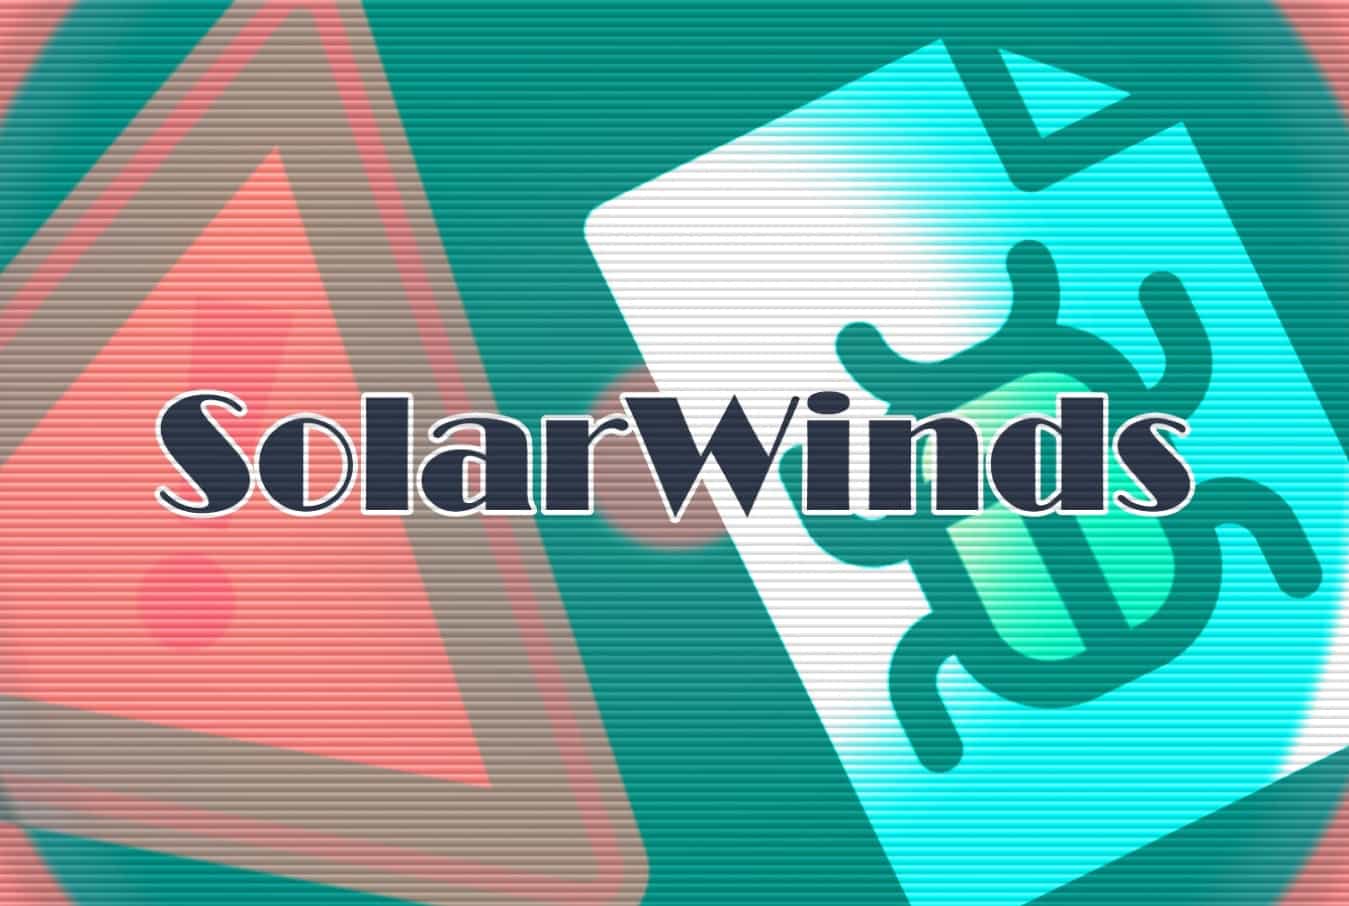 Three new malware strains found linked to SolarWinds hackers